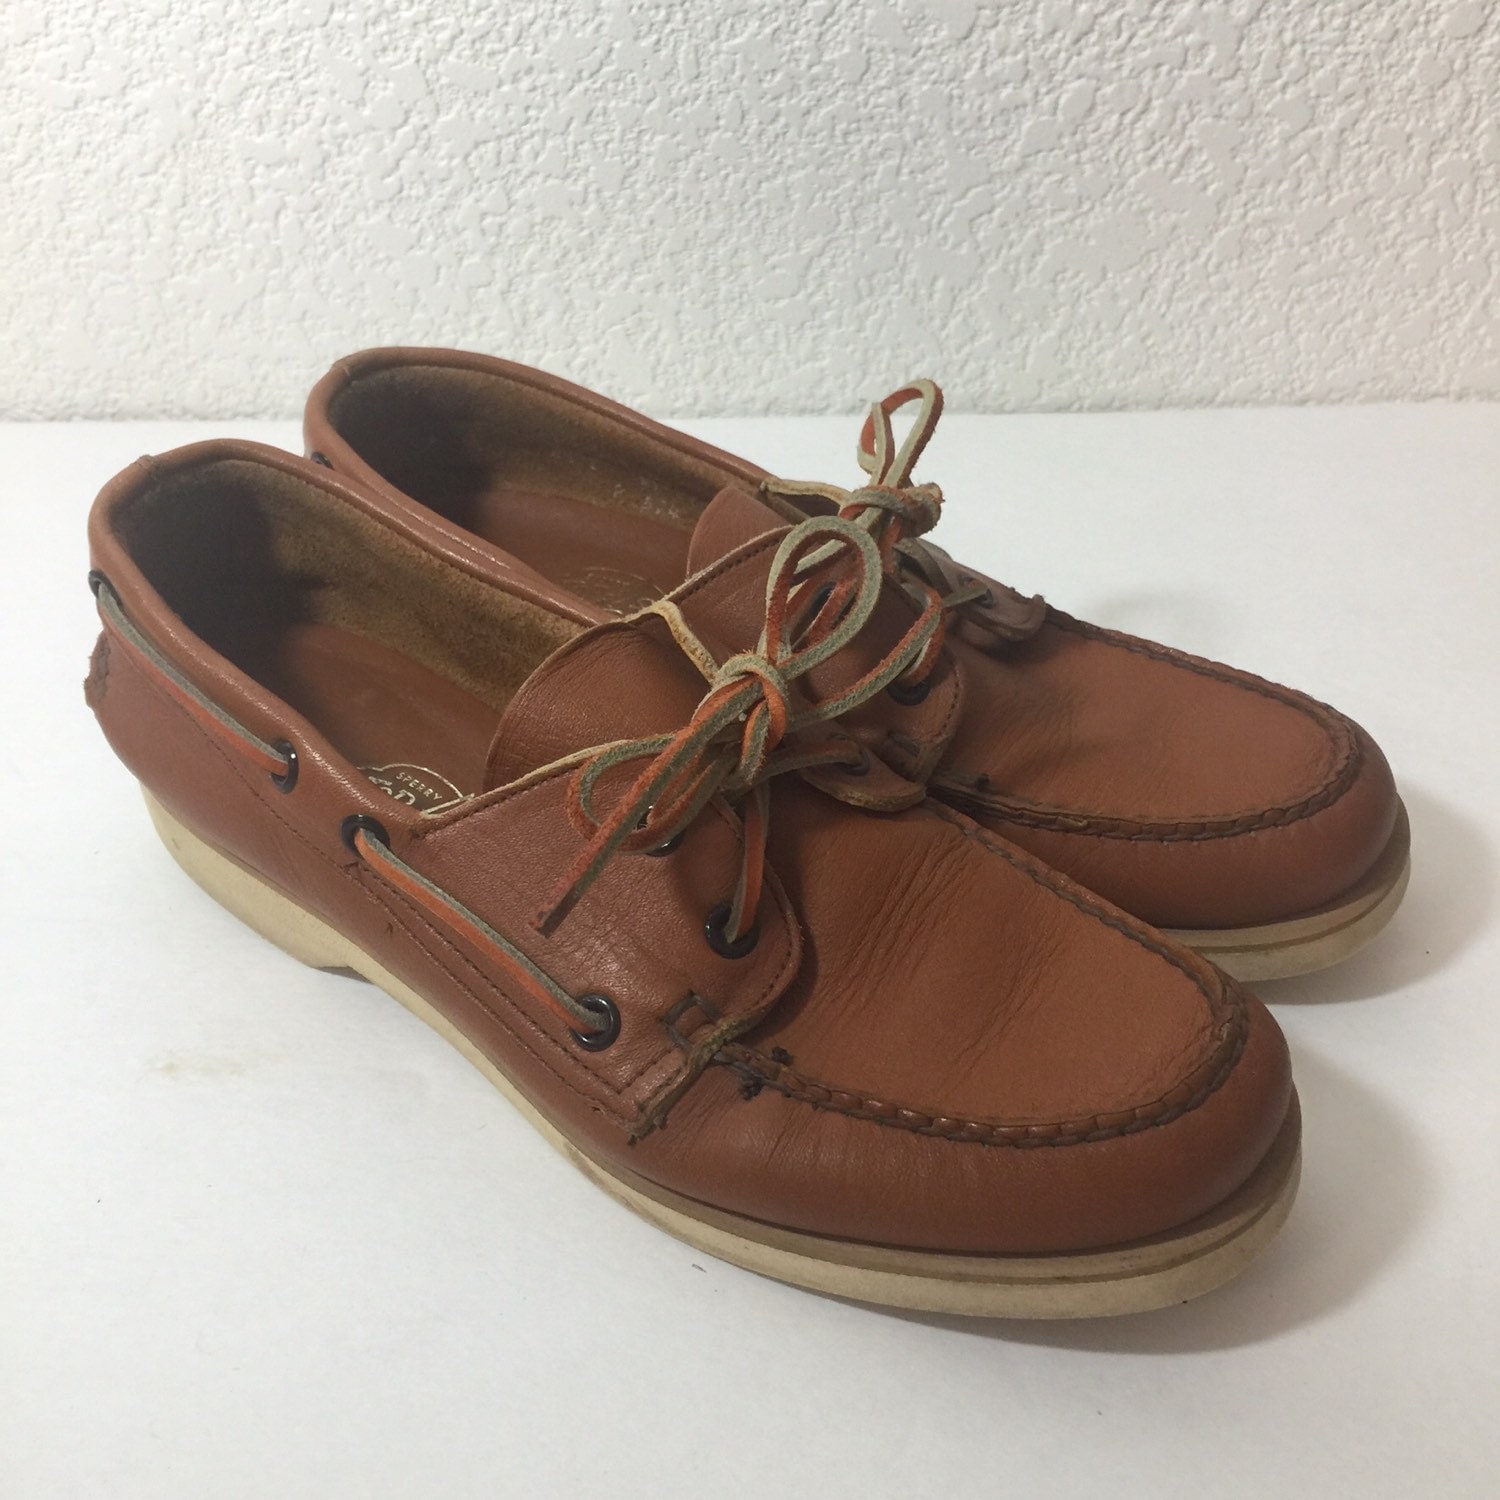 Vintage 80s Sperry Topsiders Original Style Size 8